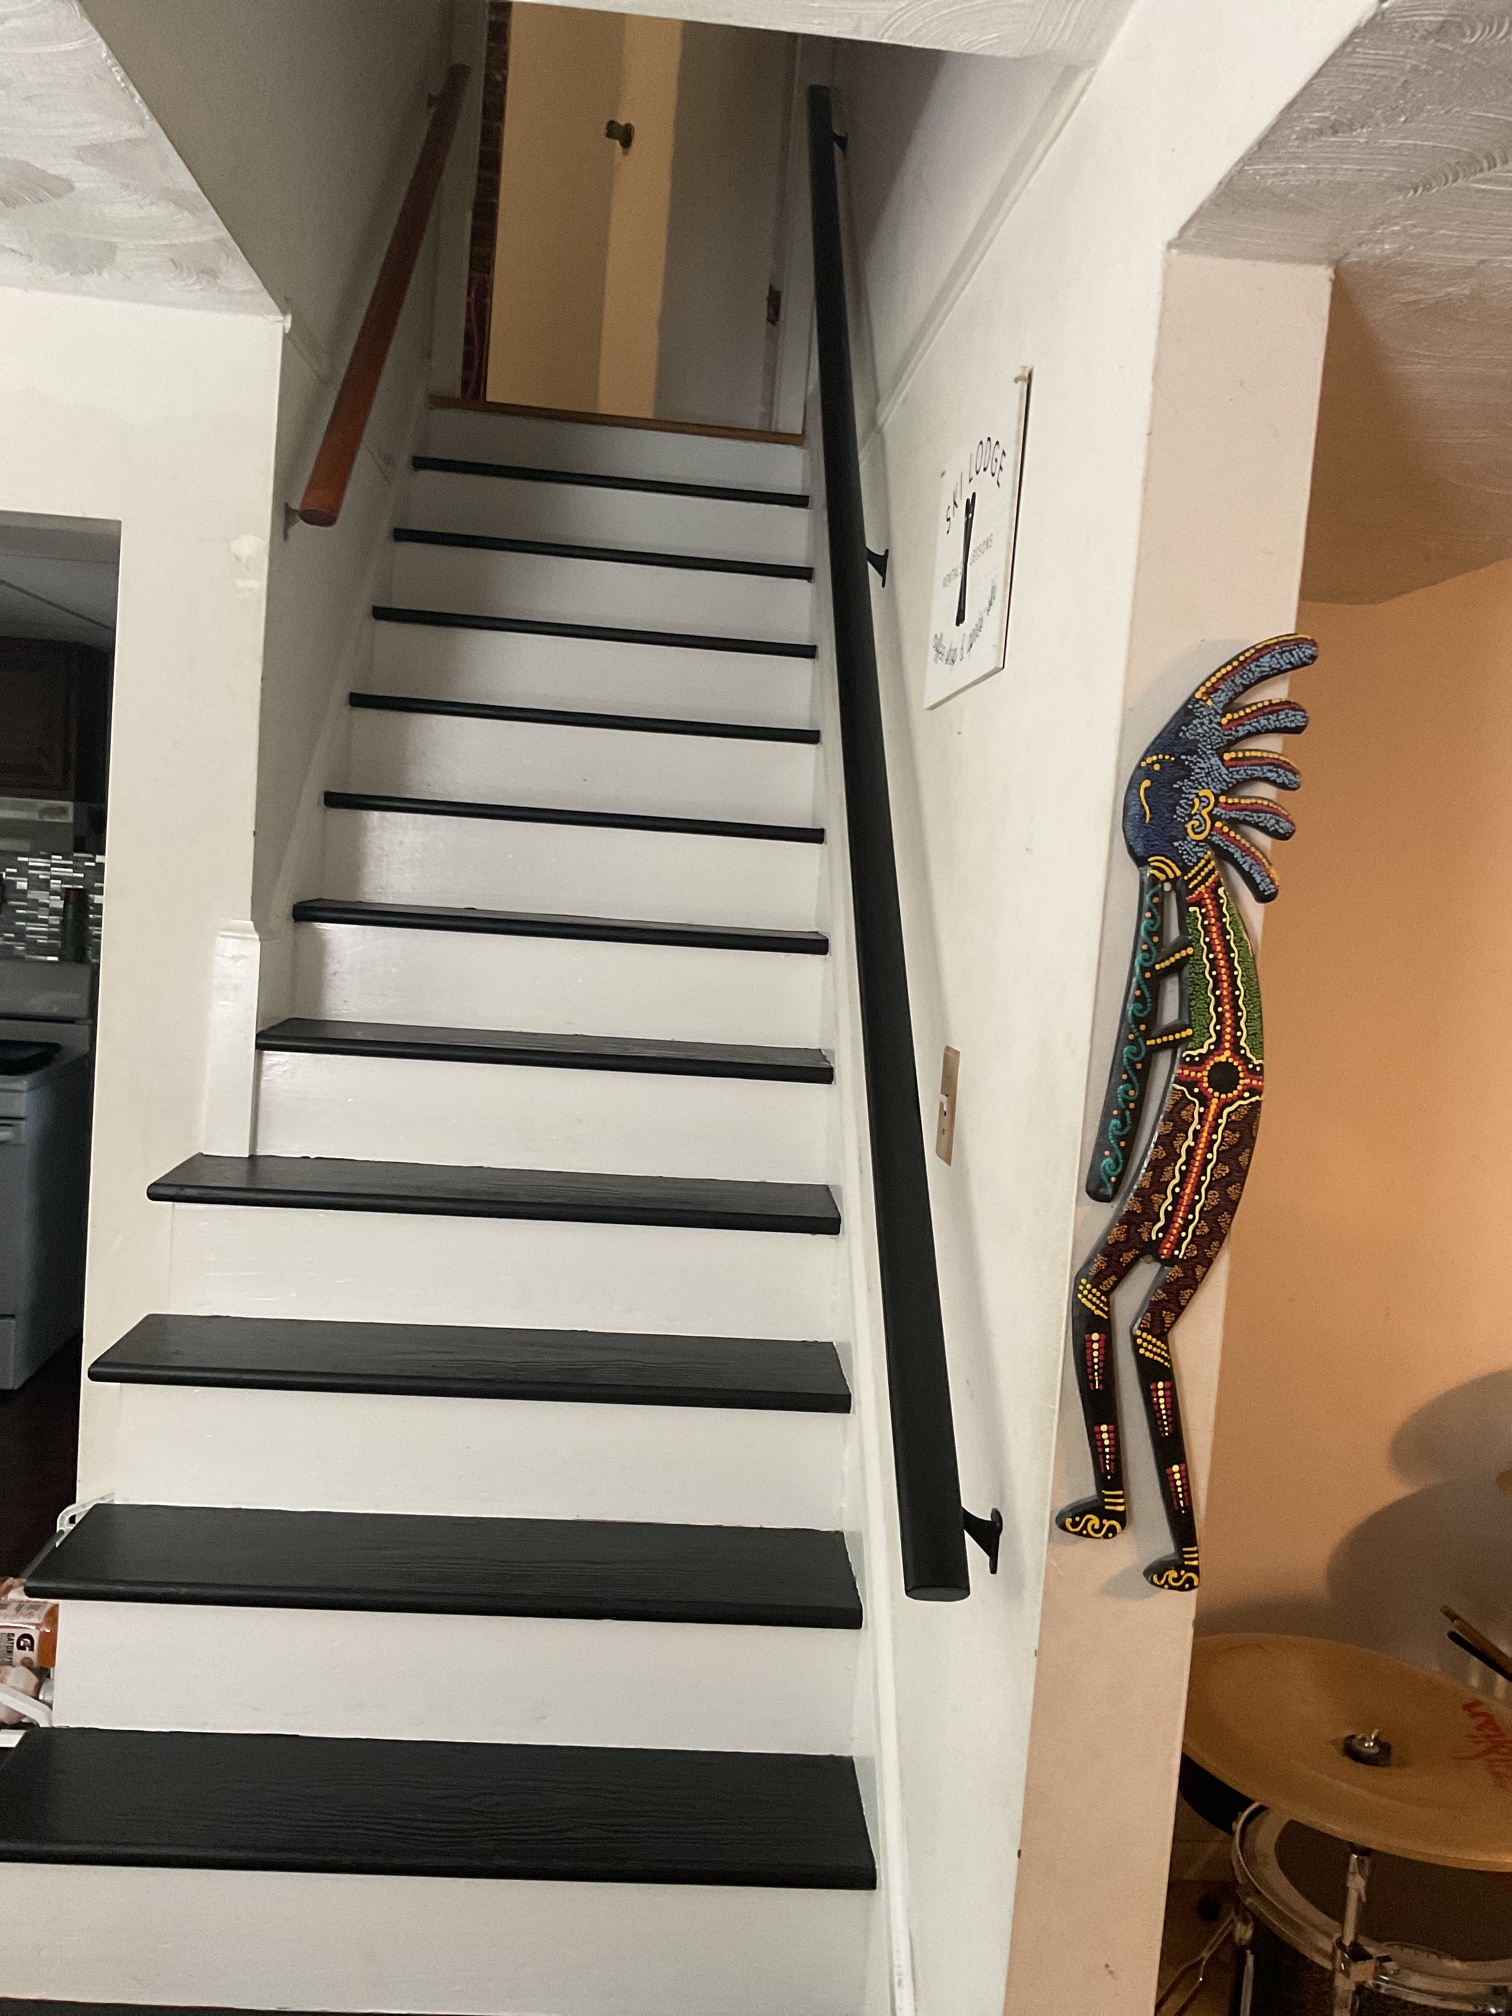 Black wood railing installed on the right of staircase ascending in Chevy Chase, MD, and matches the steps in color black.